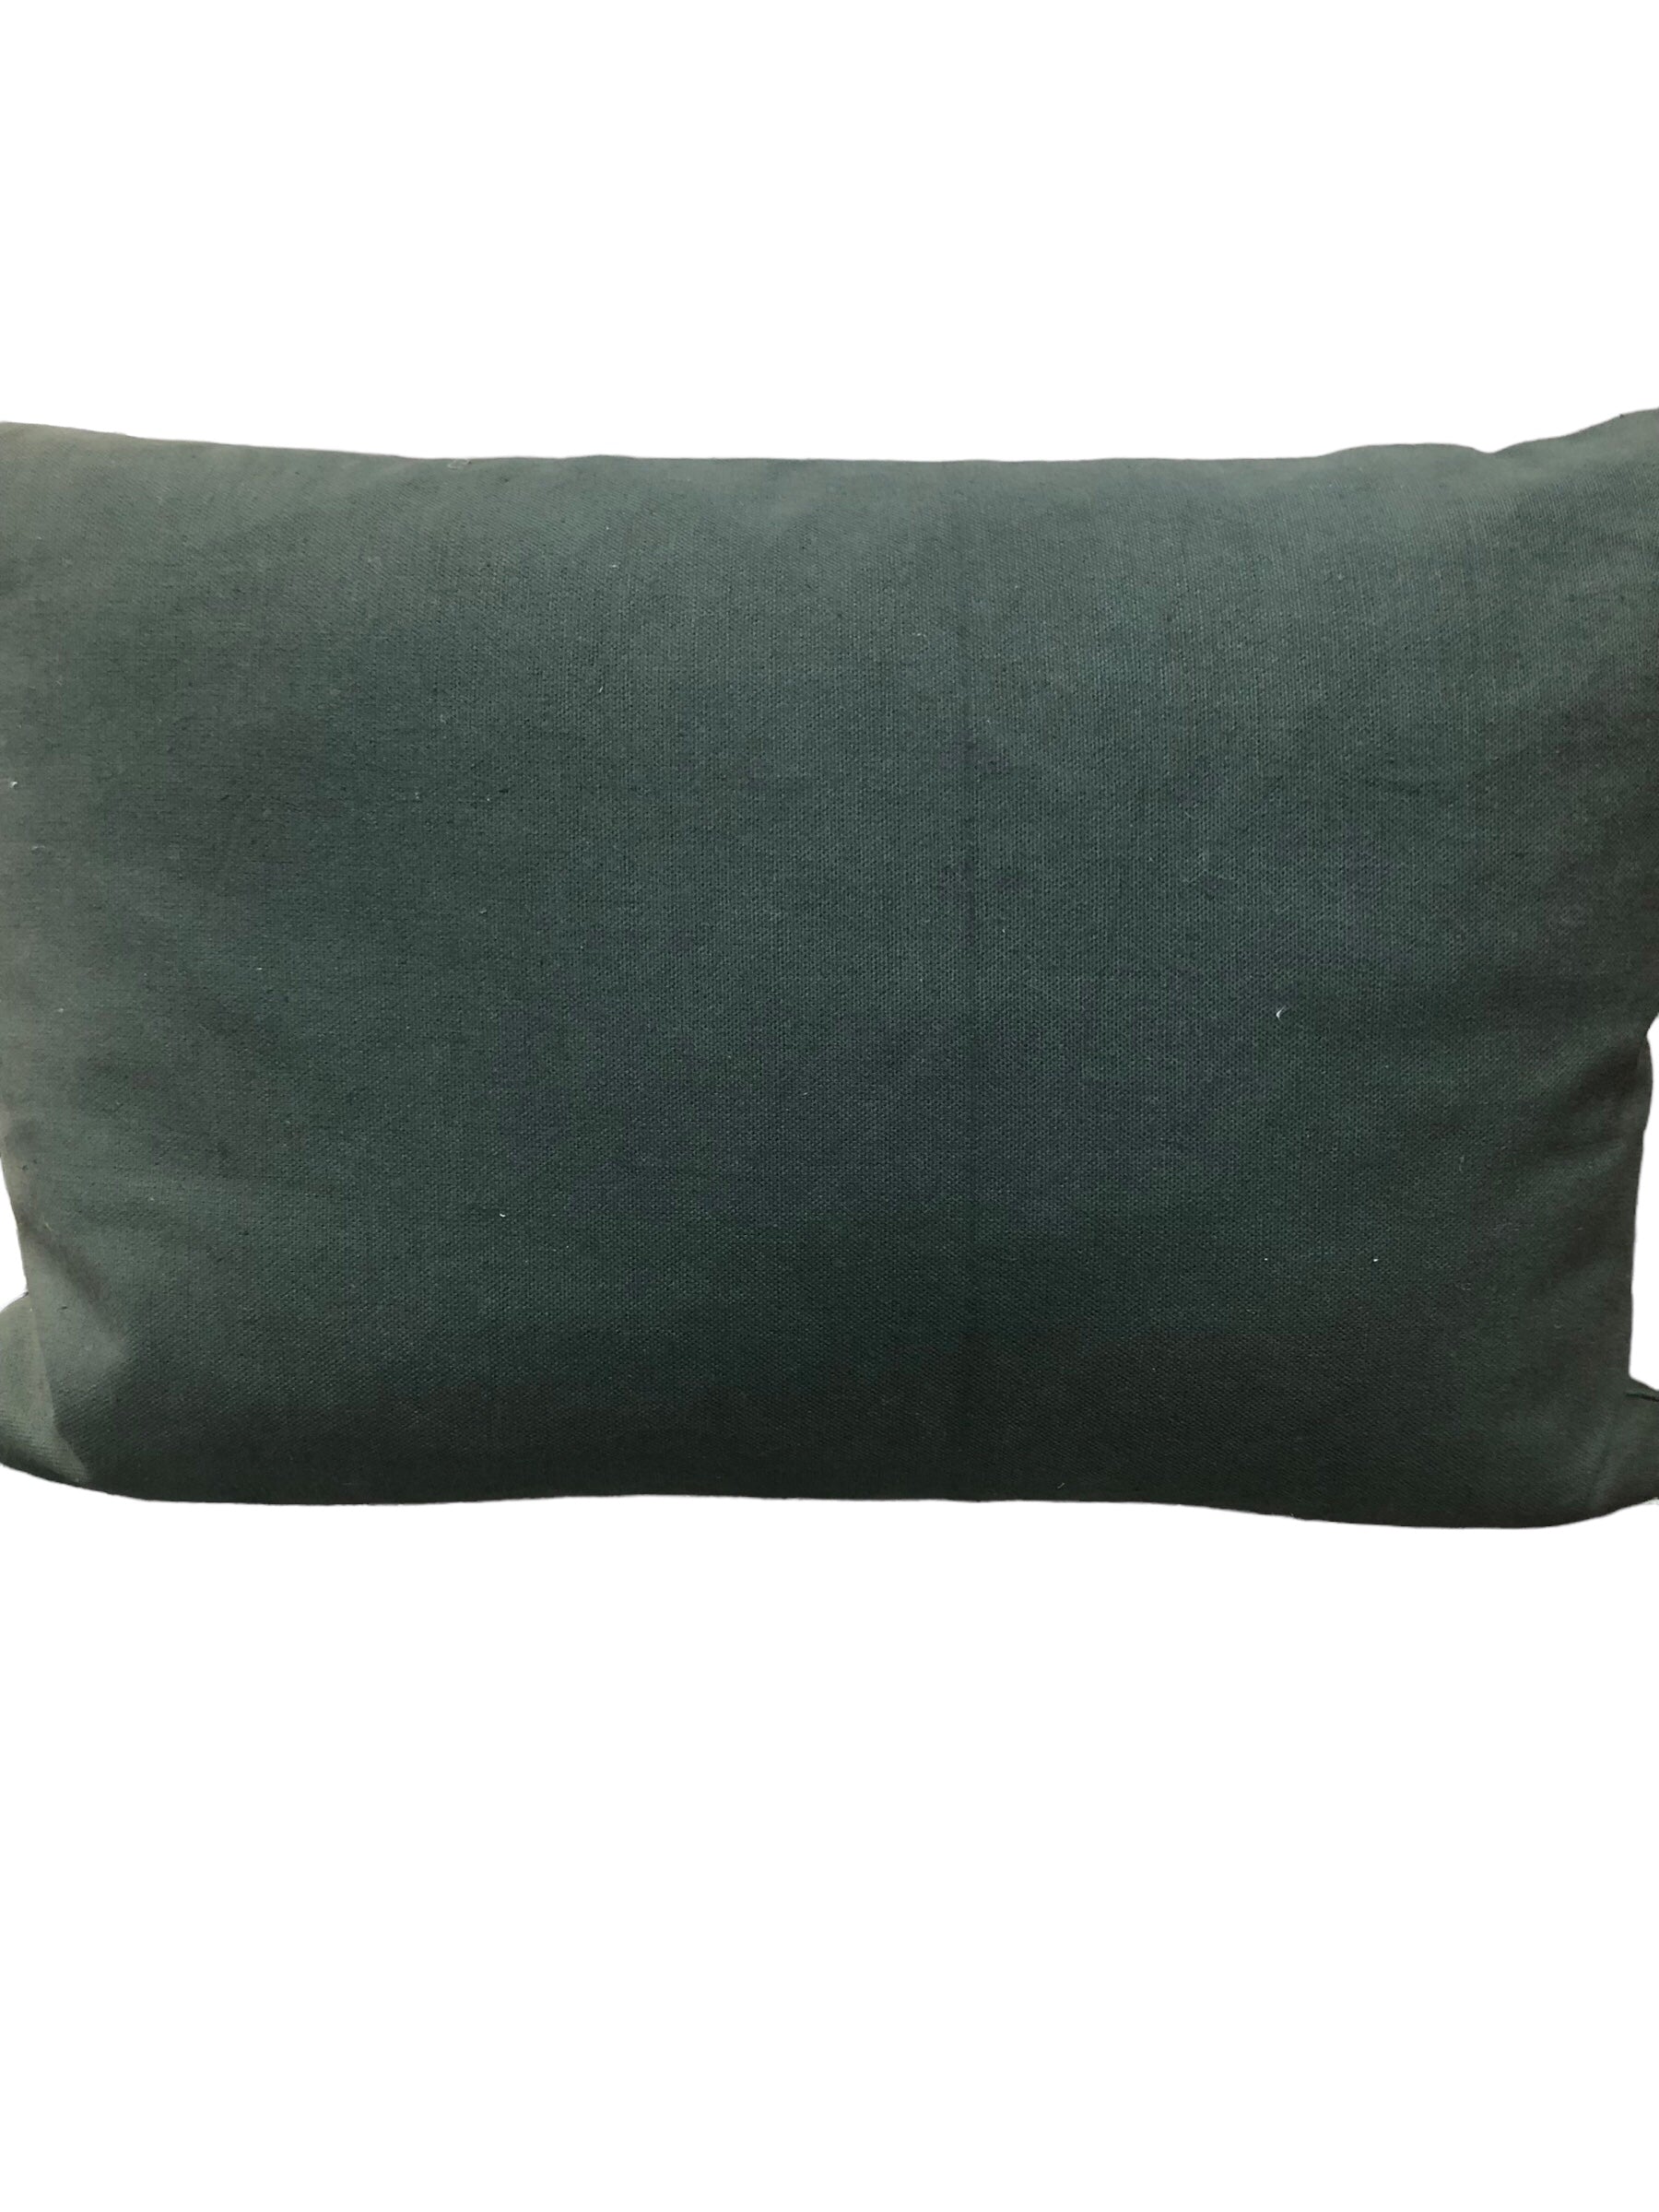 Abstract Black/Grey/Blue Pillow